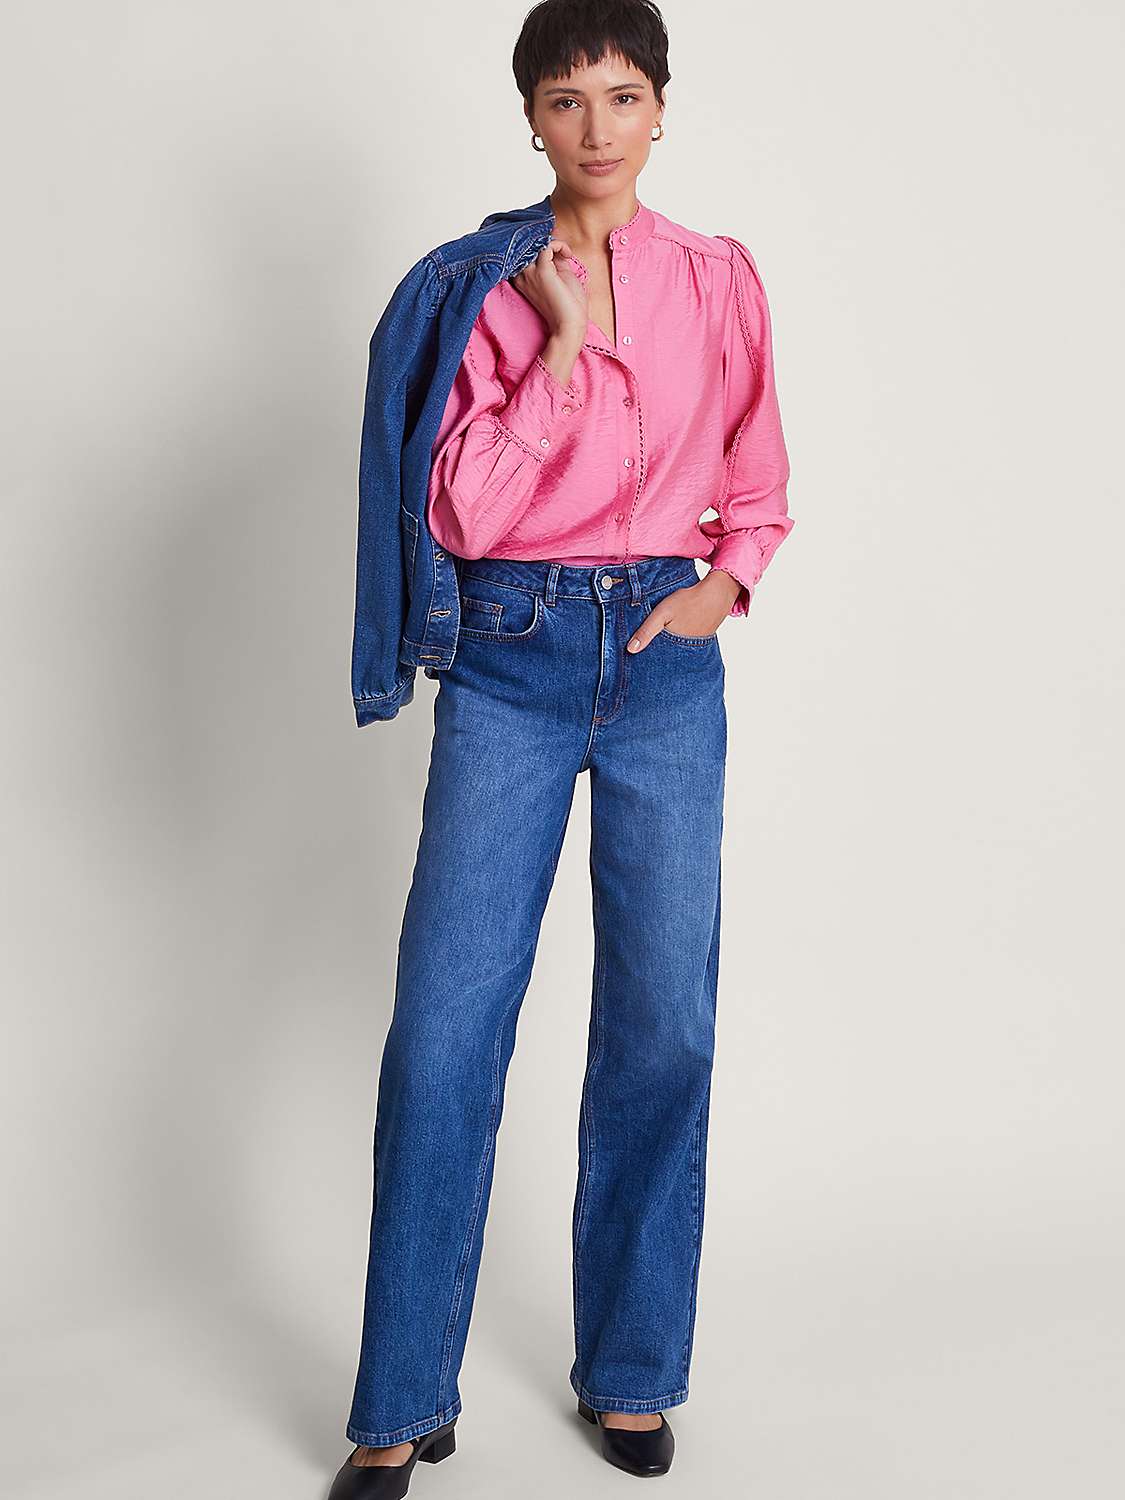 Buy Monsoon Pippa Lace Trim Blouse, Pink Online at johnlewis.com